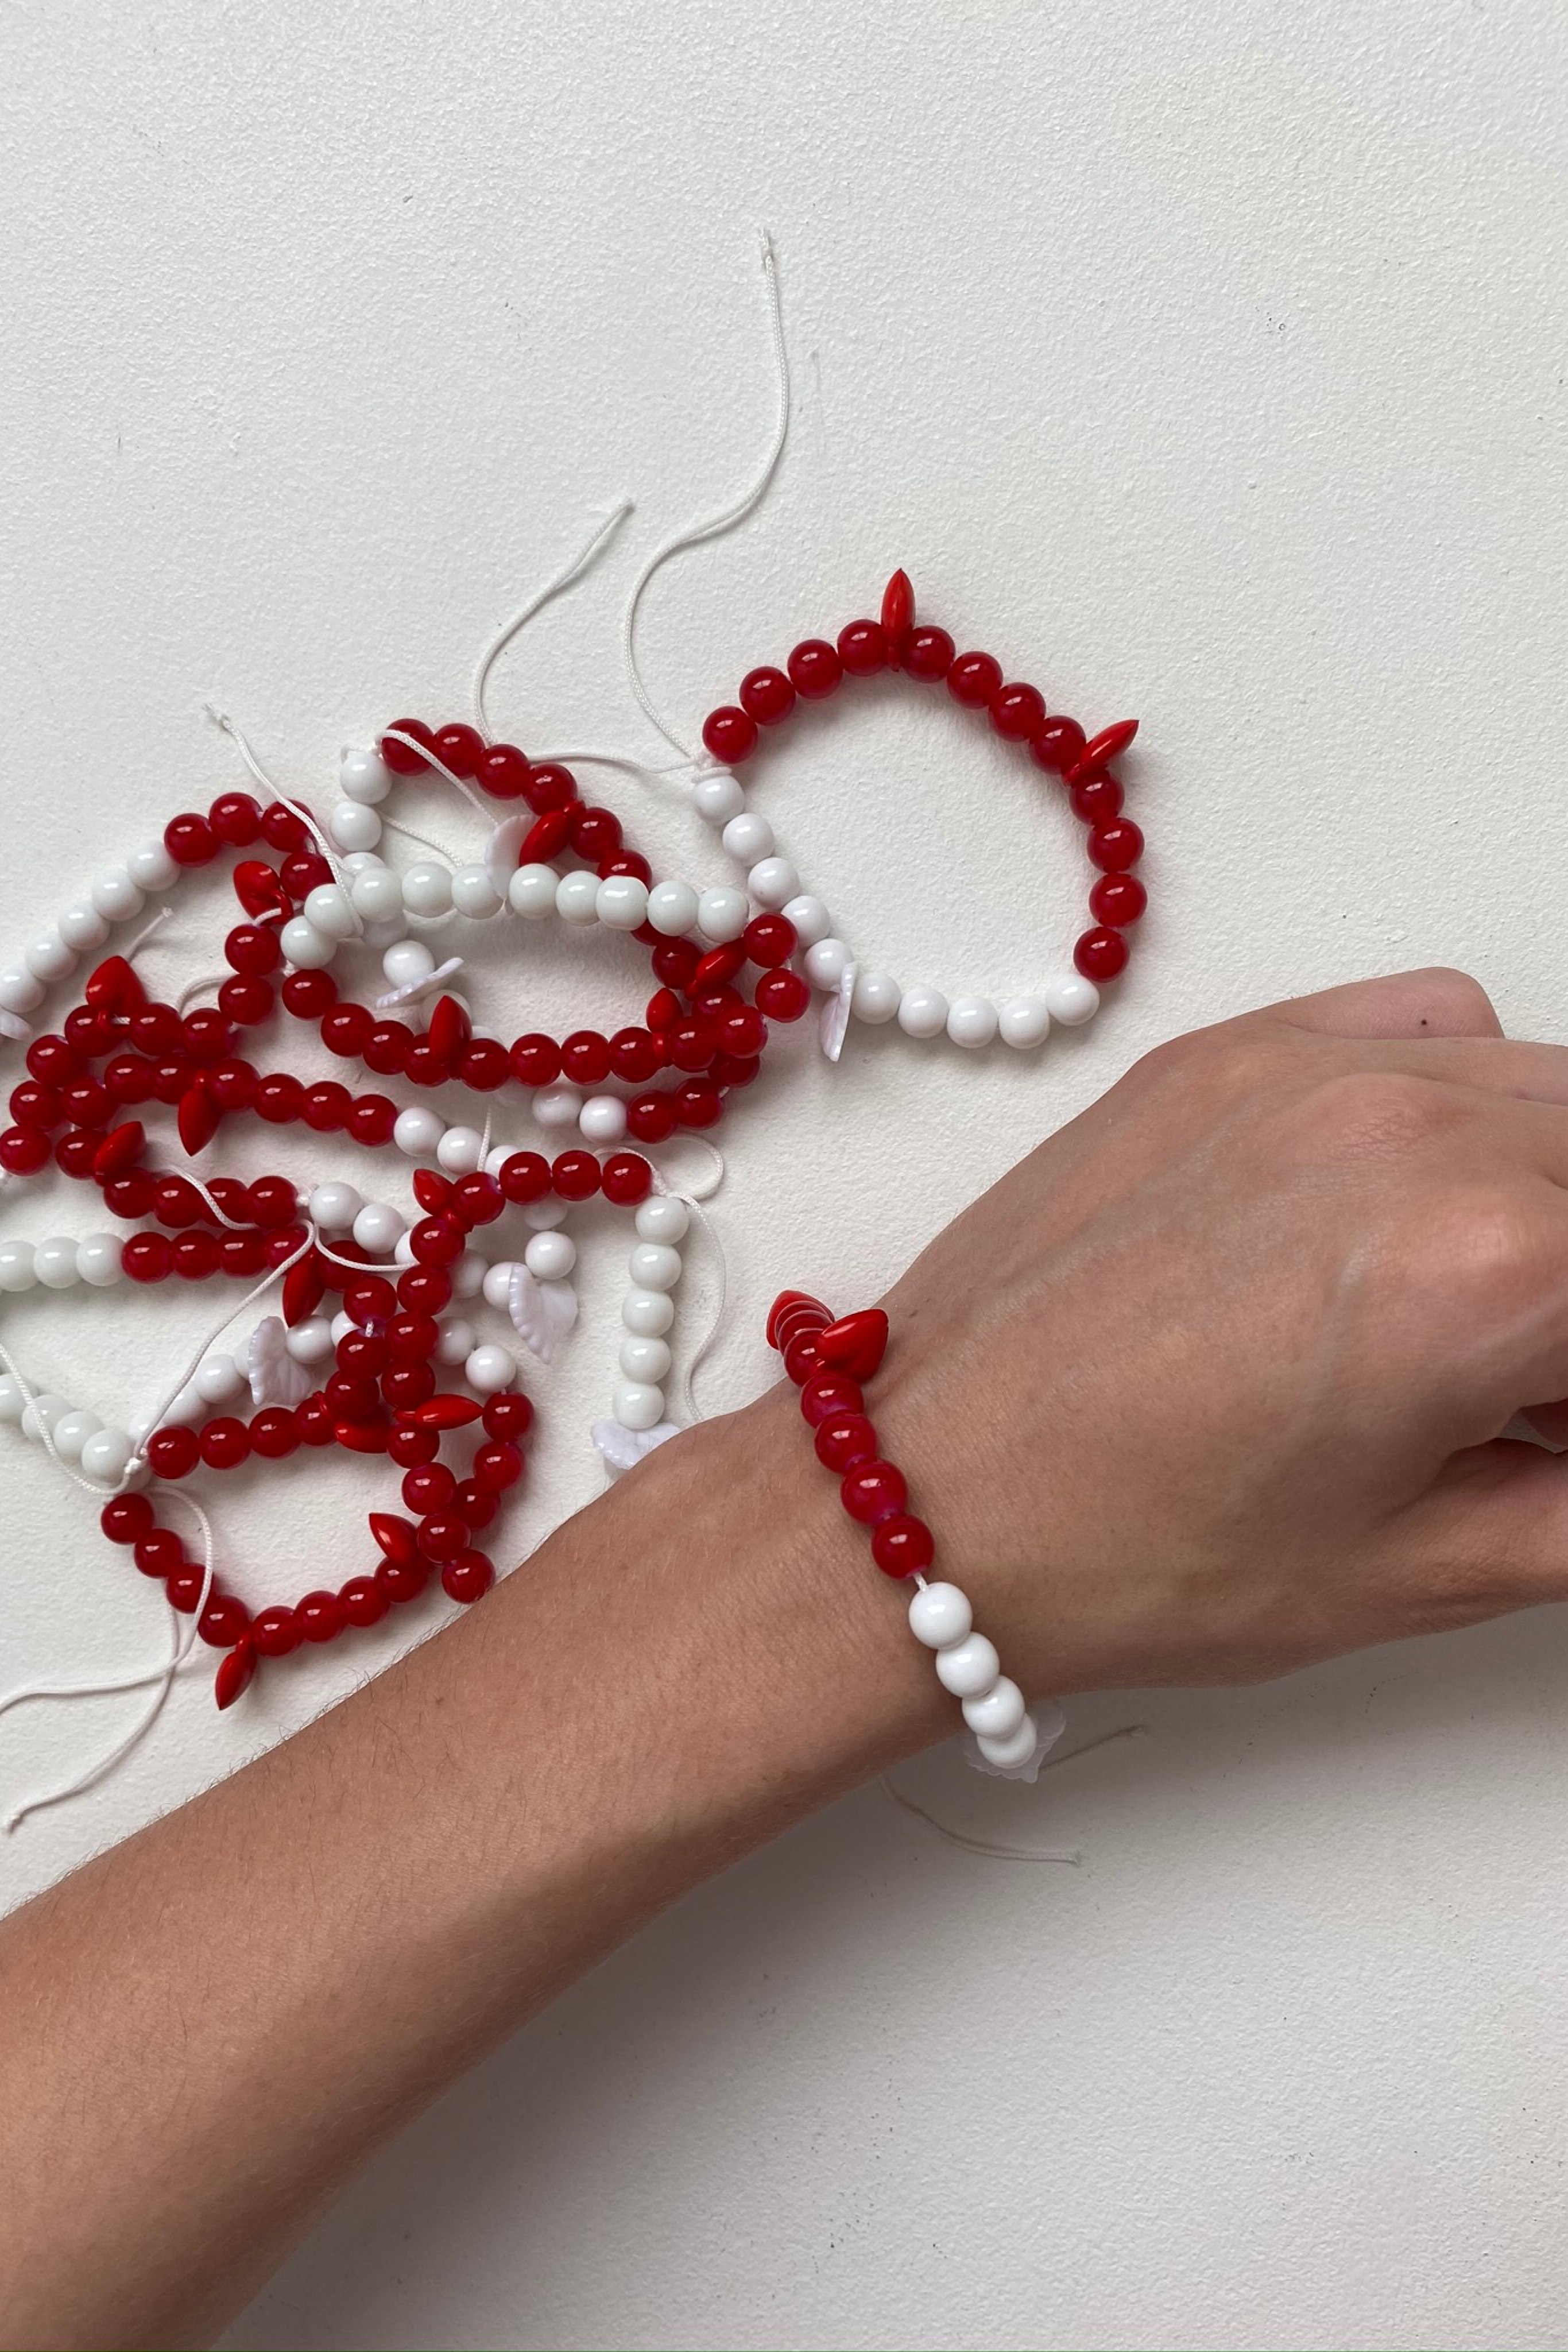 Bracelet with hearts in red